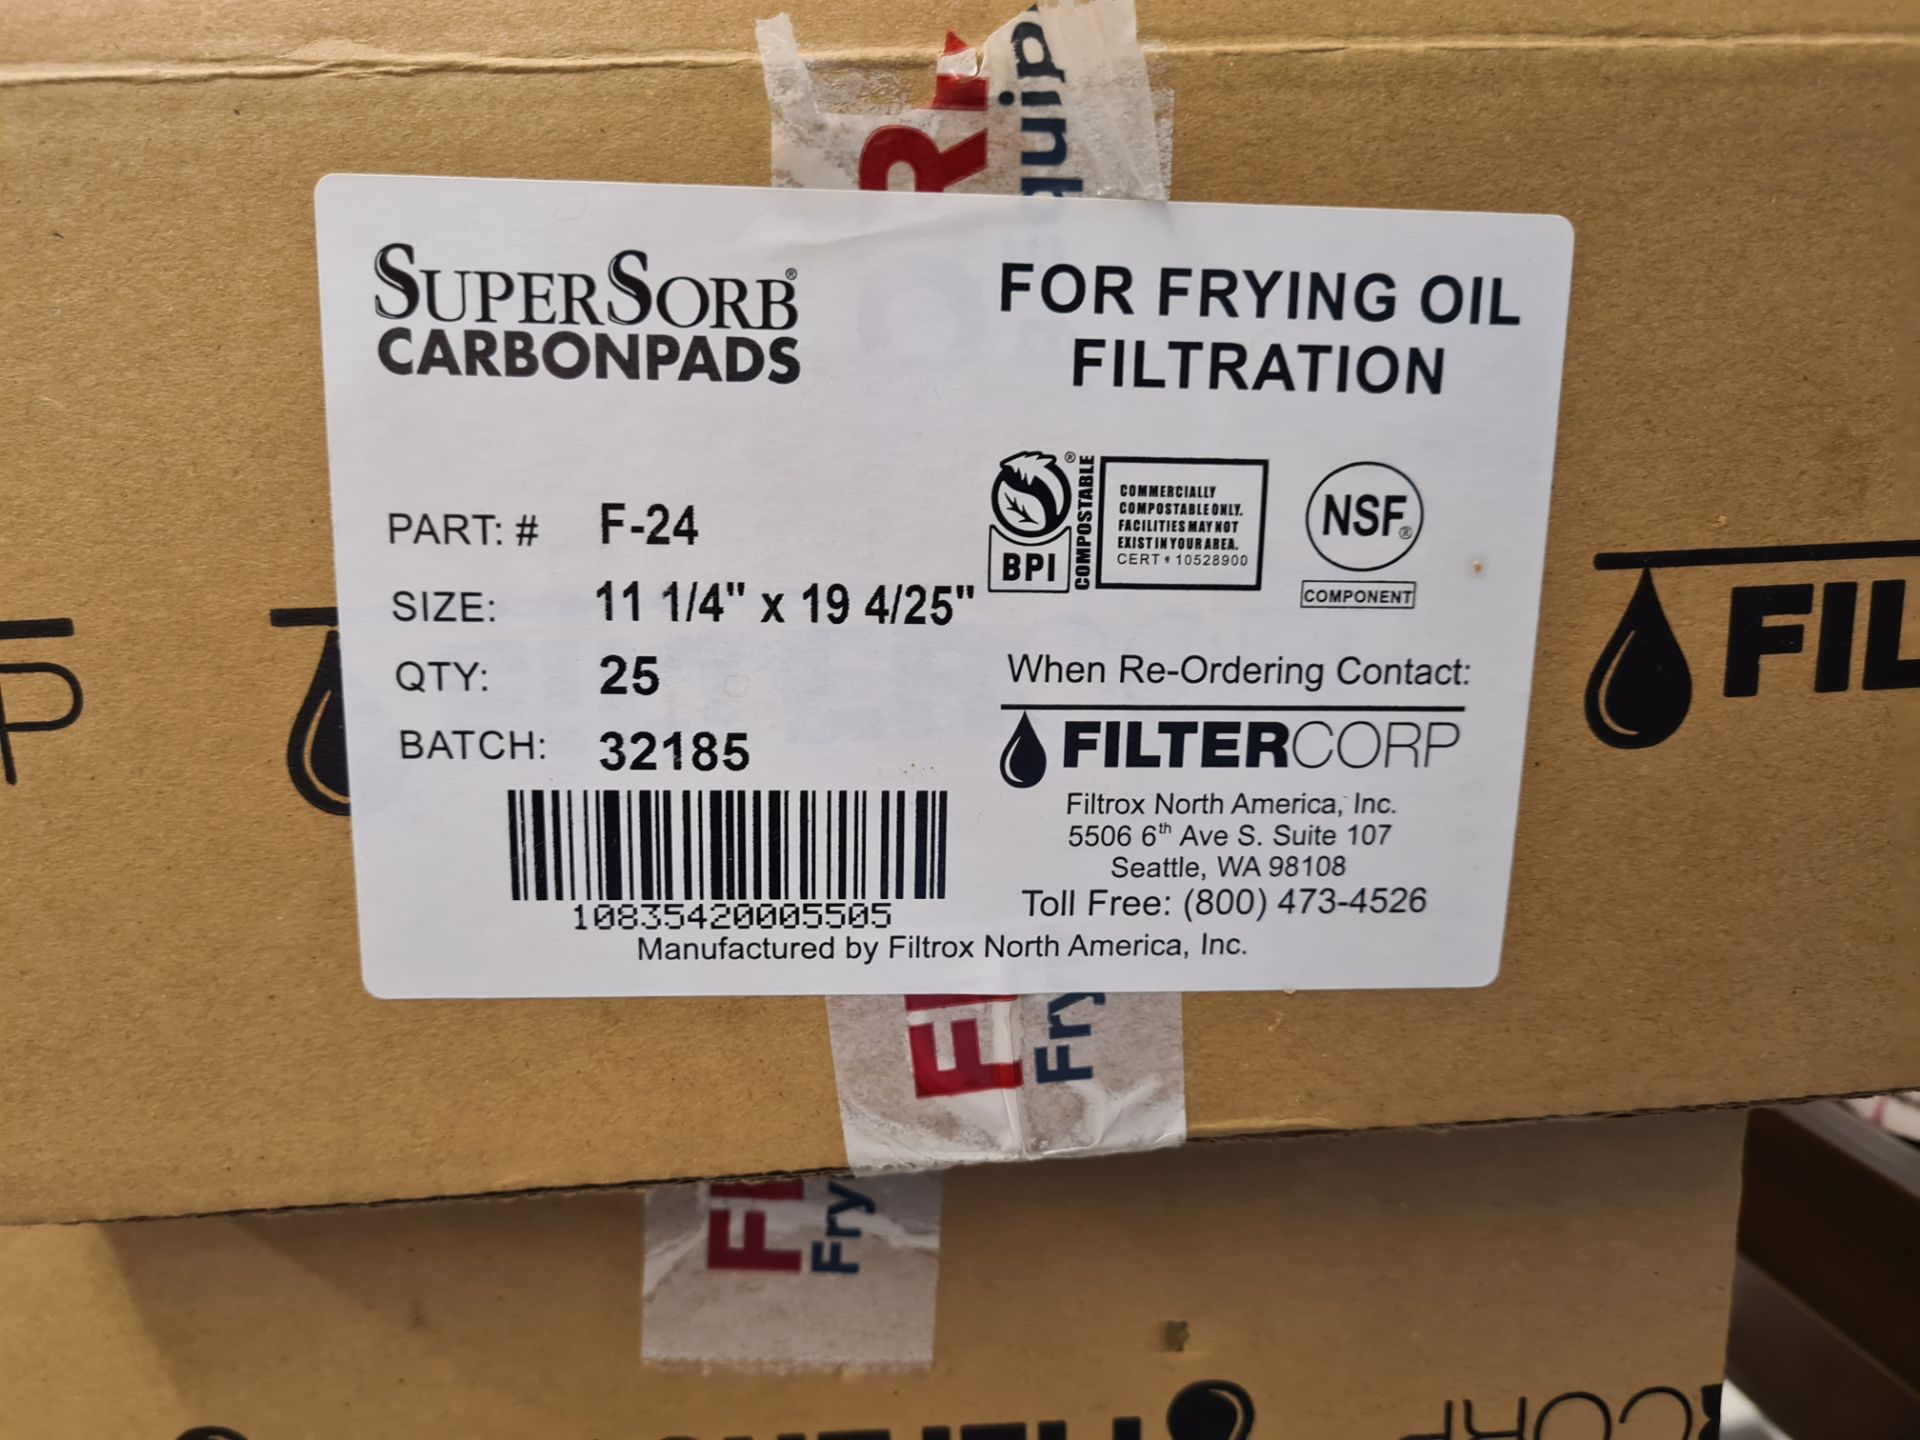 Eight Boxes of SuperSorb Carbon Pads F-24 For Frying Oil Filtration - Image 2 of 2